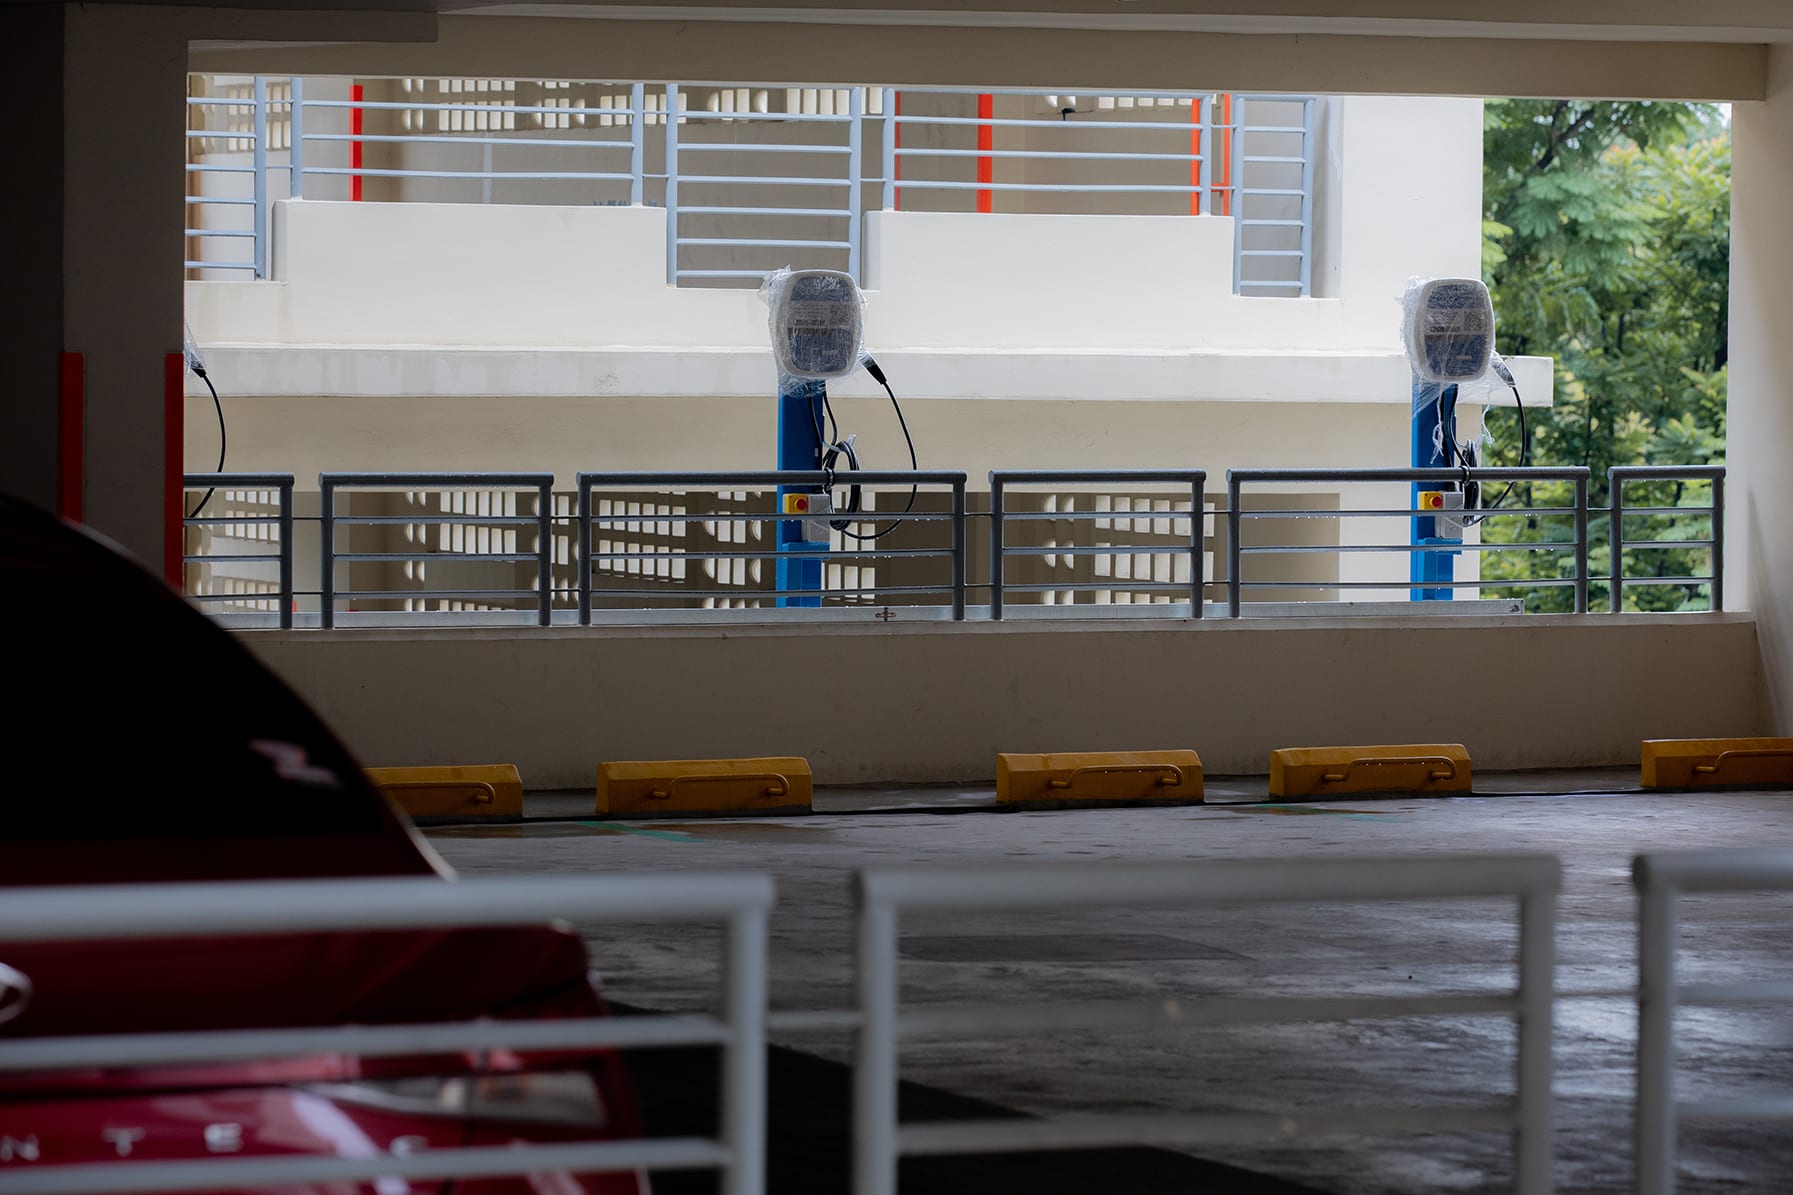 All HDB car parks to have at least 3 electric vehicle charging points by 2025